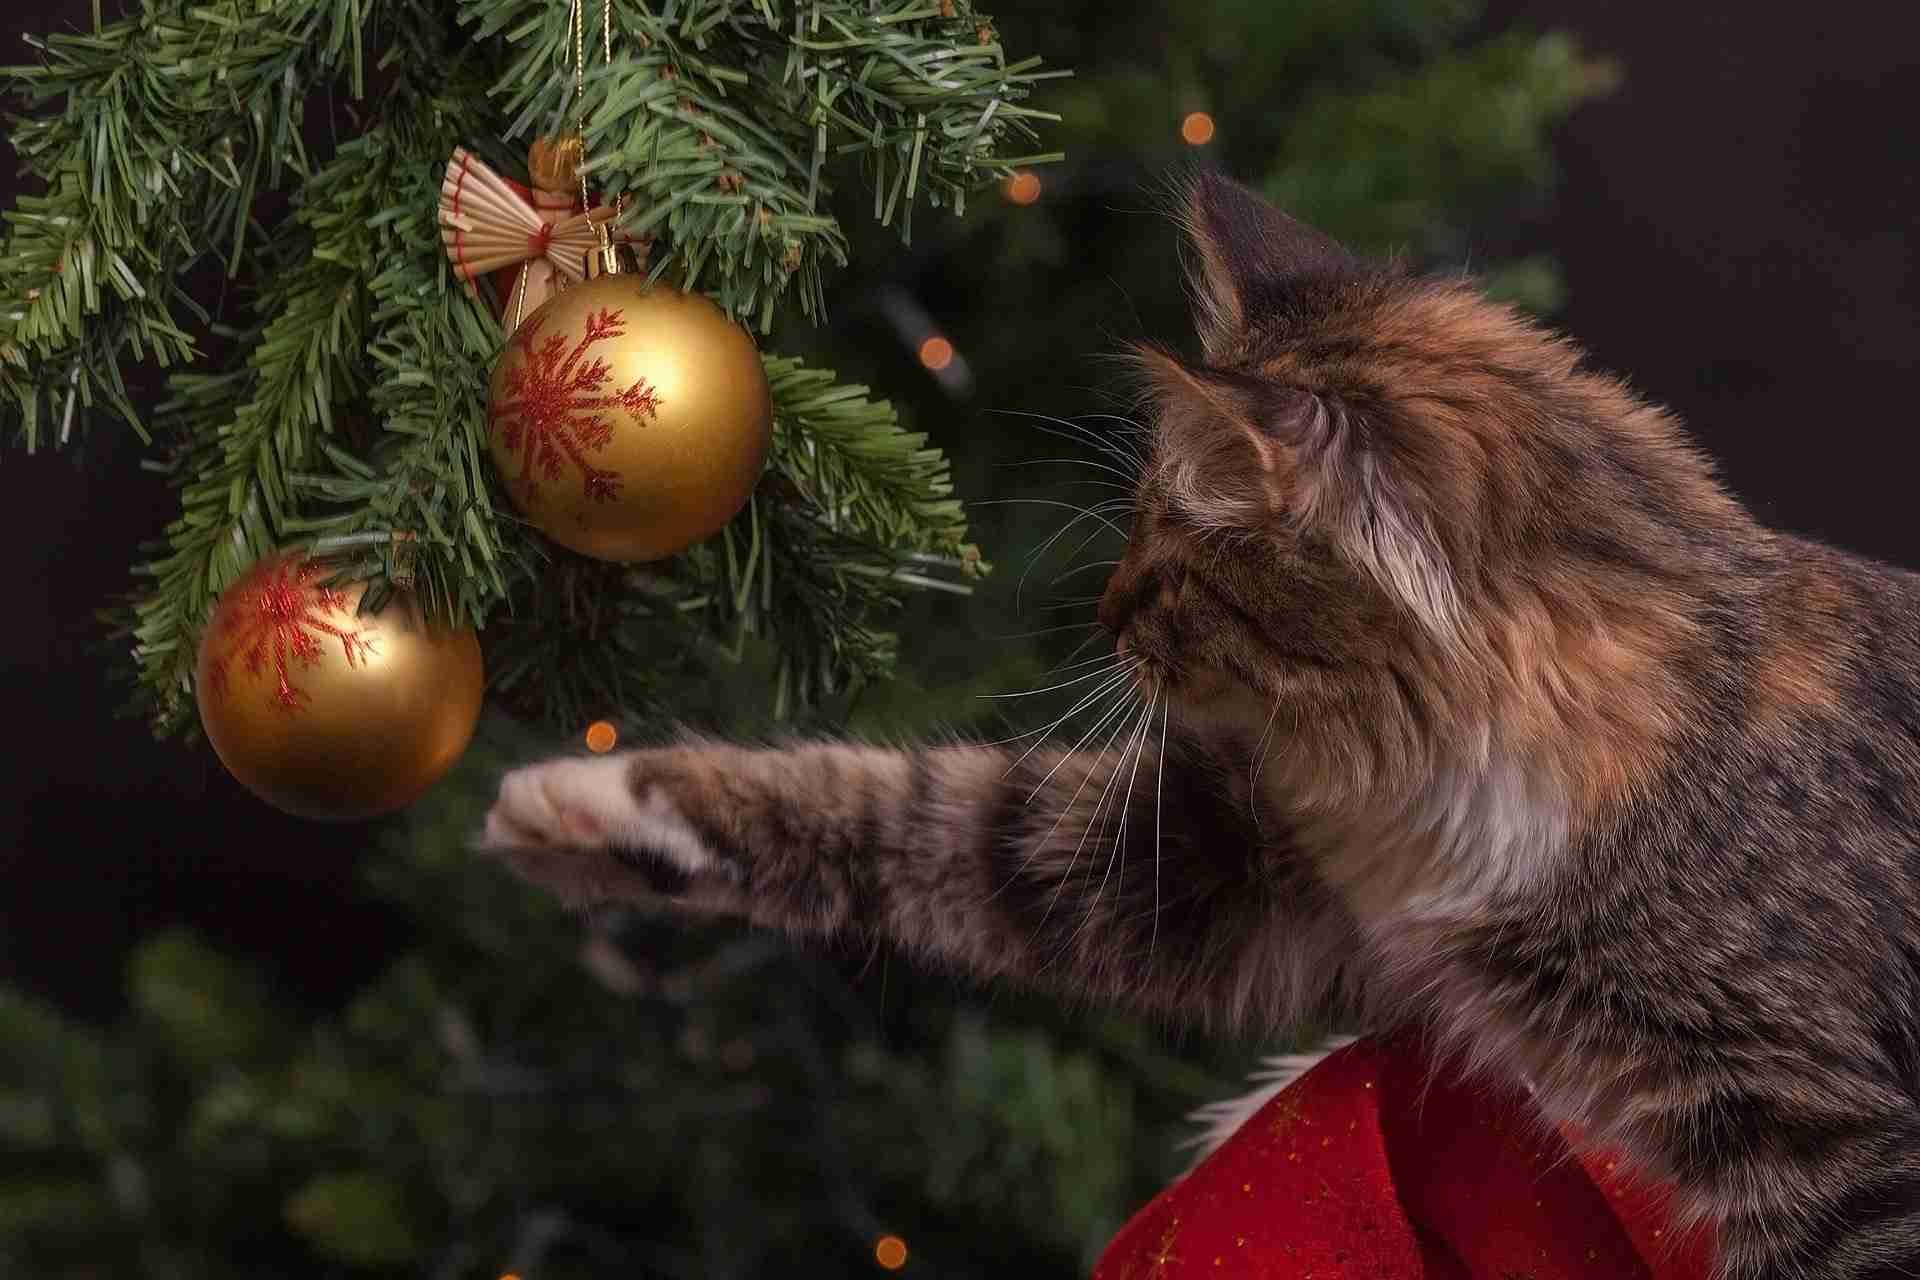 Keeping Your Animals Safe During the Holiday Season